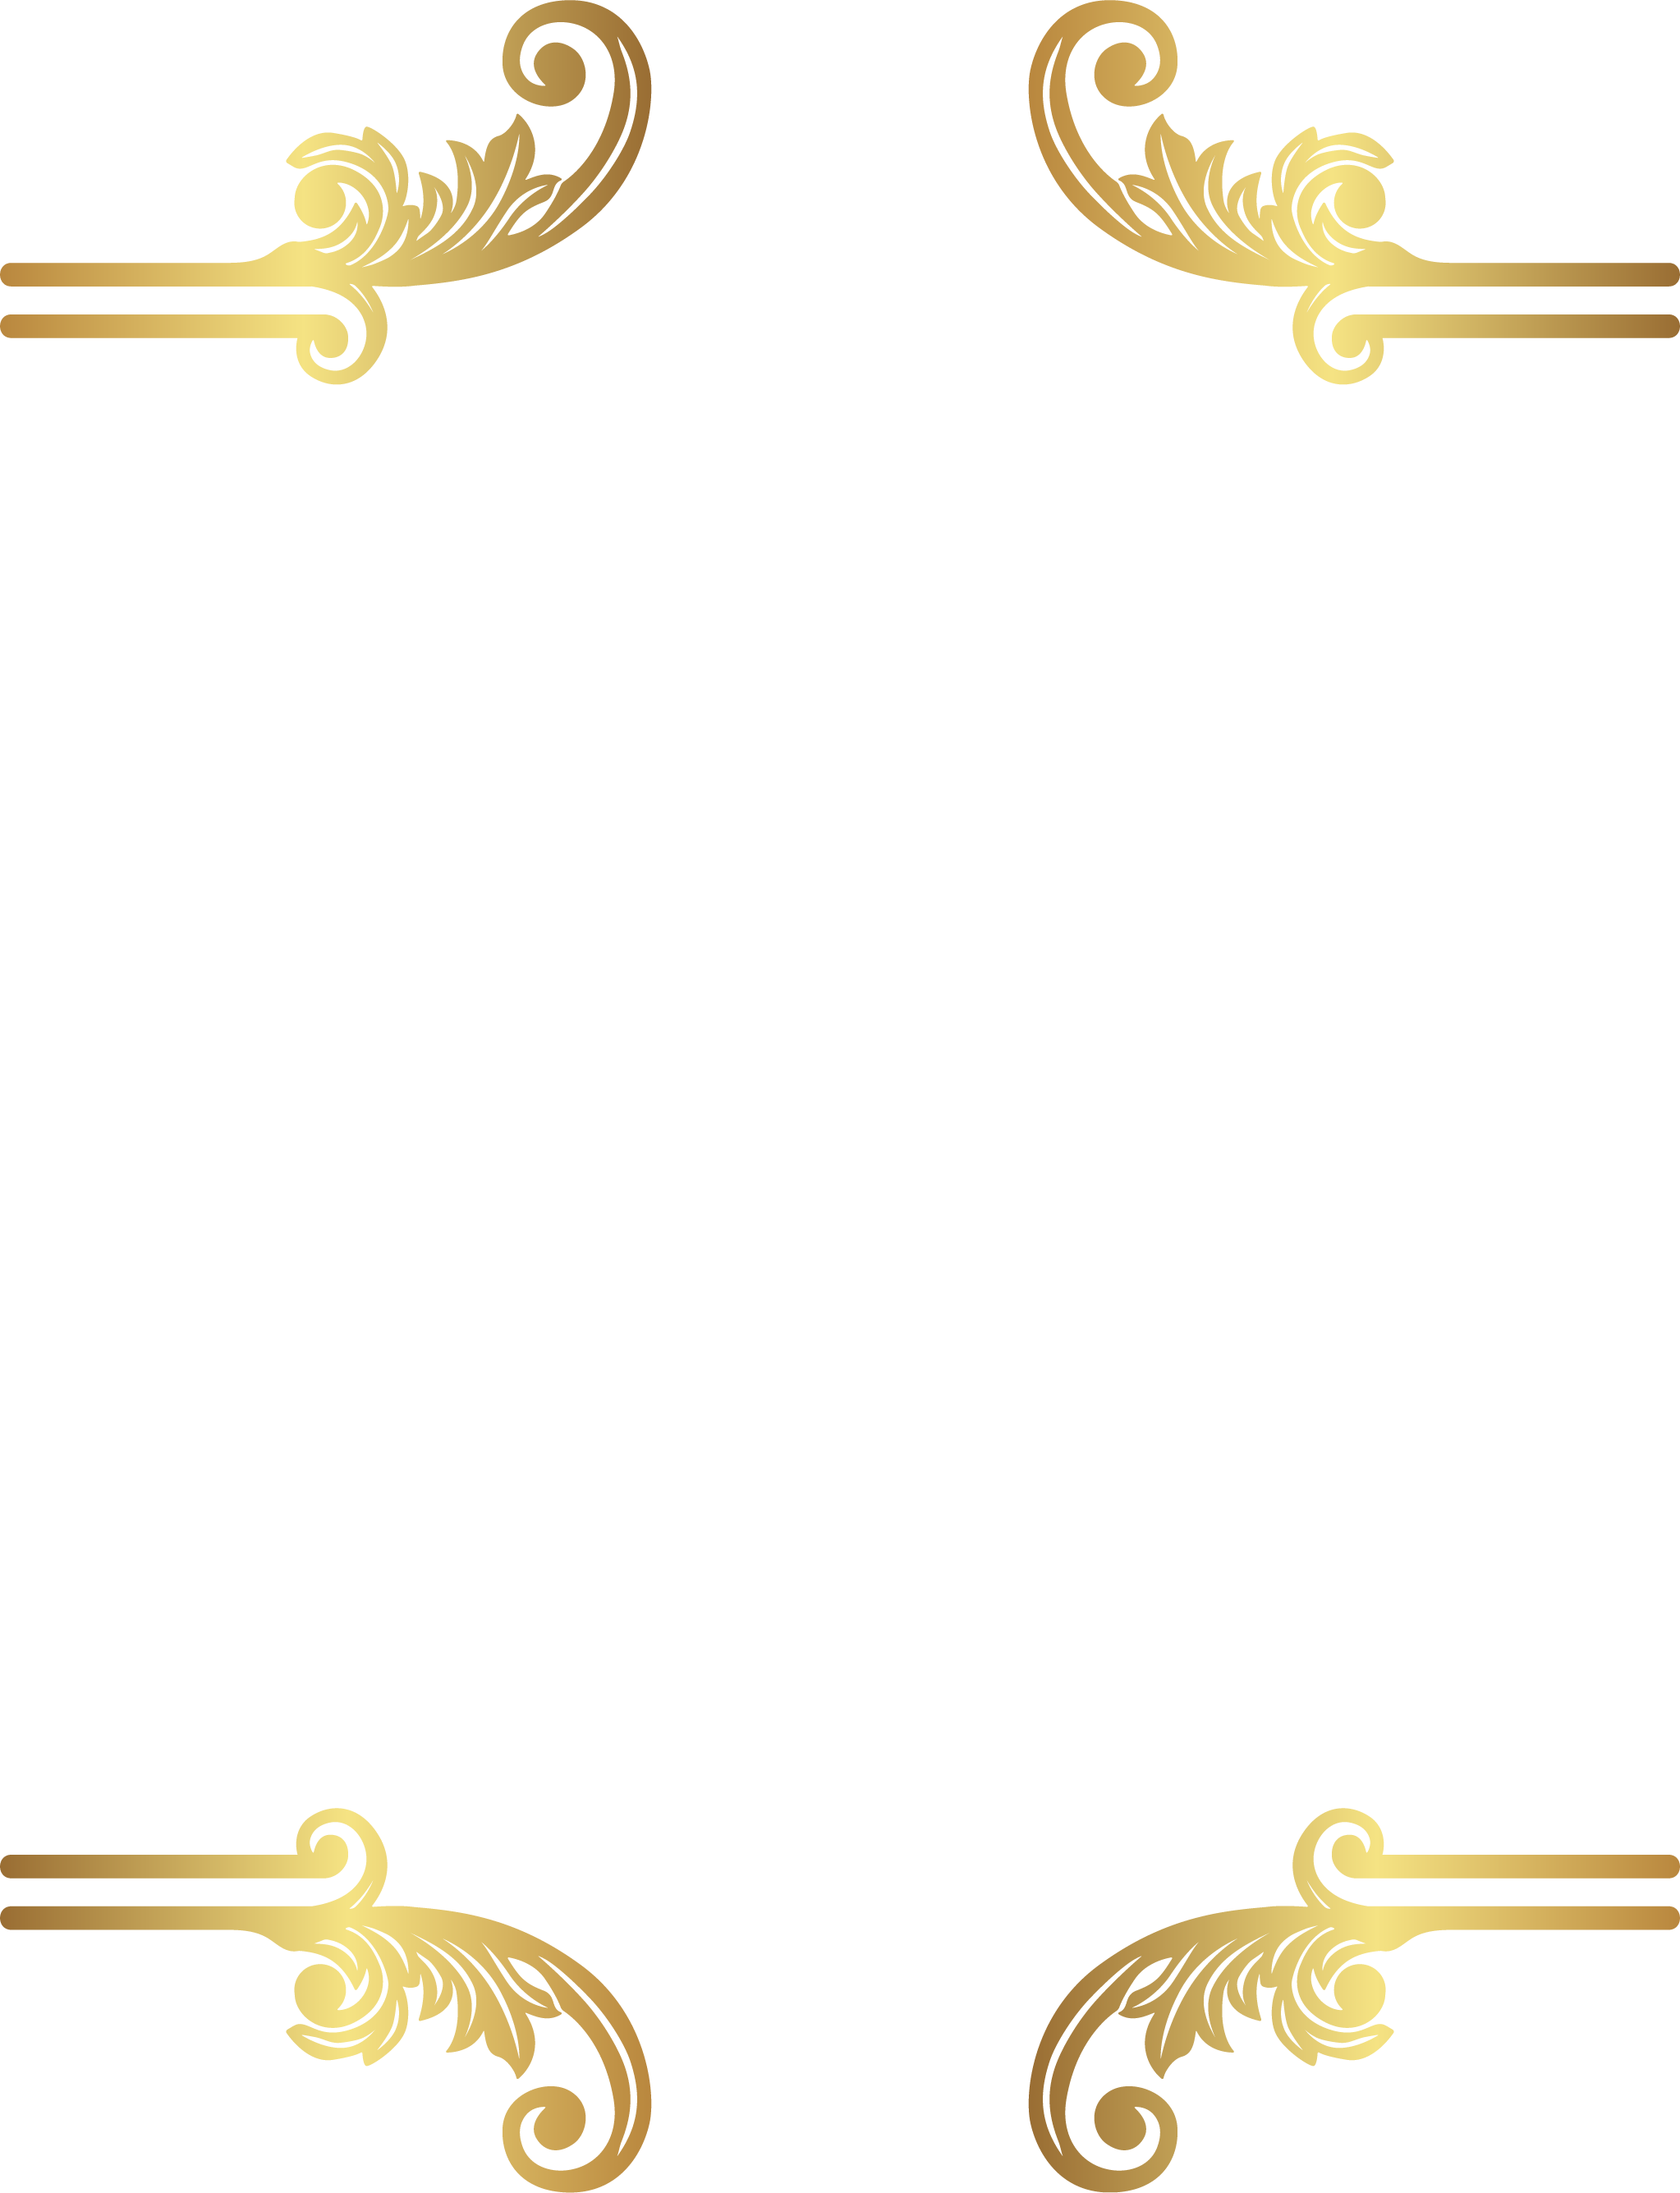 Gold Border Design Png Free Download Vector Psd And Stock Image